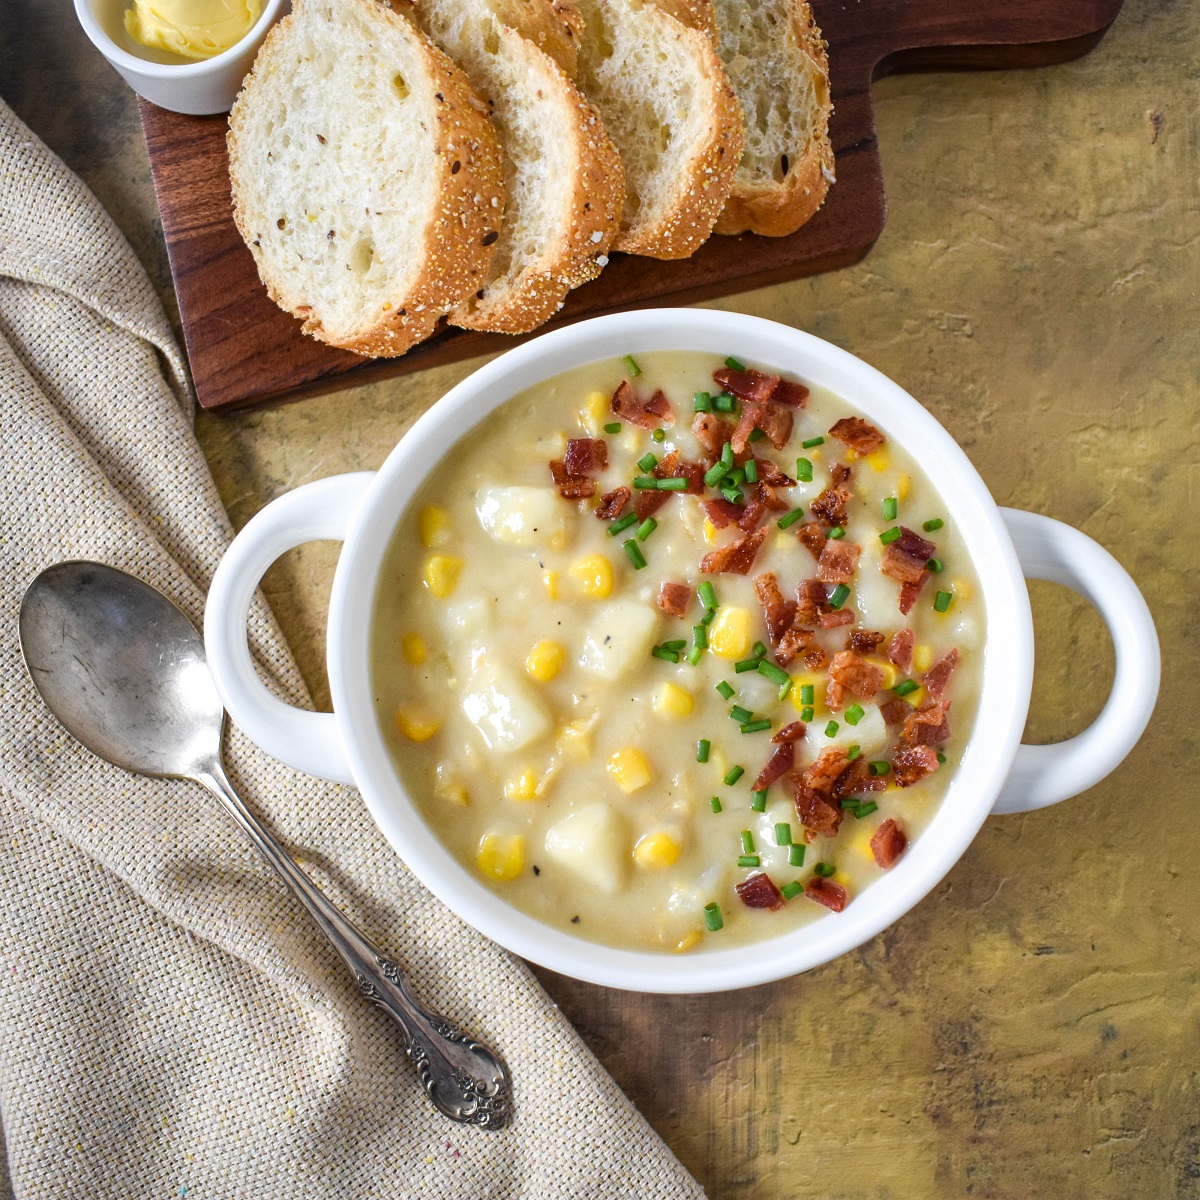 The potato corn chowder garnished with bacon bits and chives served in a white bowl with sliced bread on a board in the background.